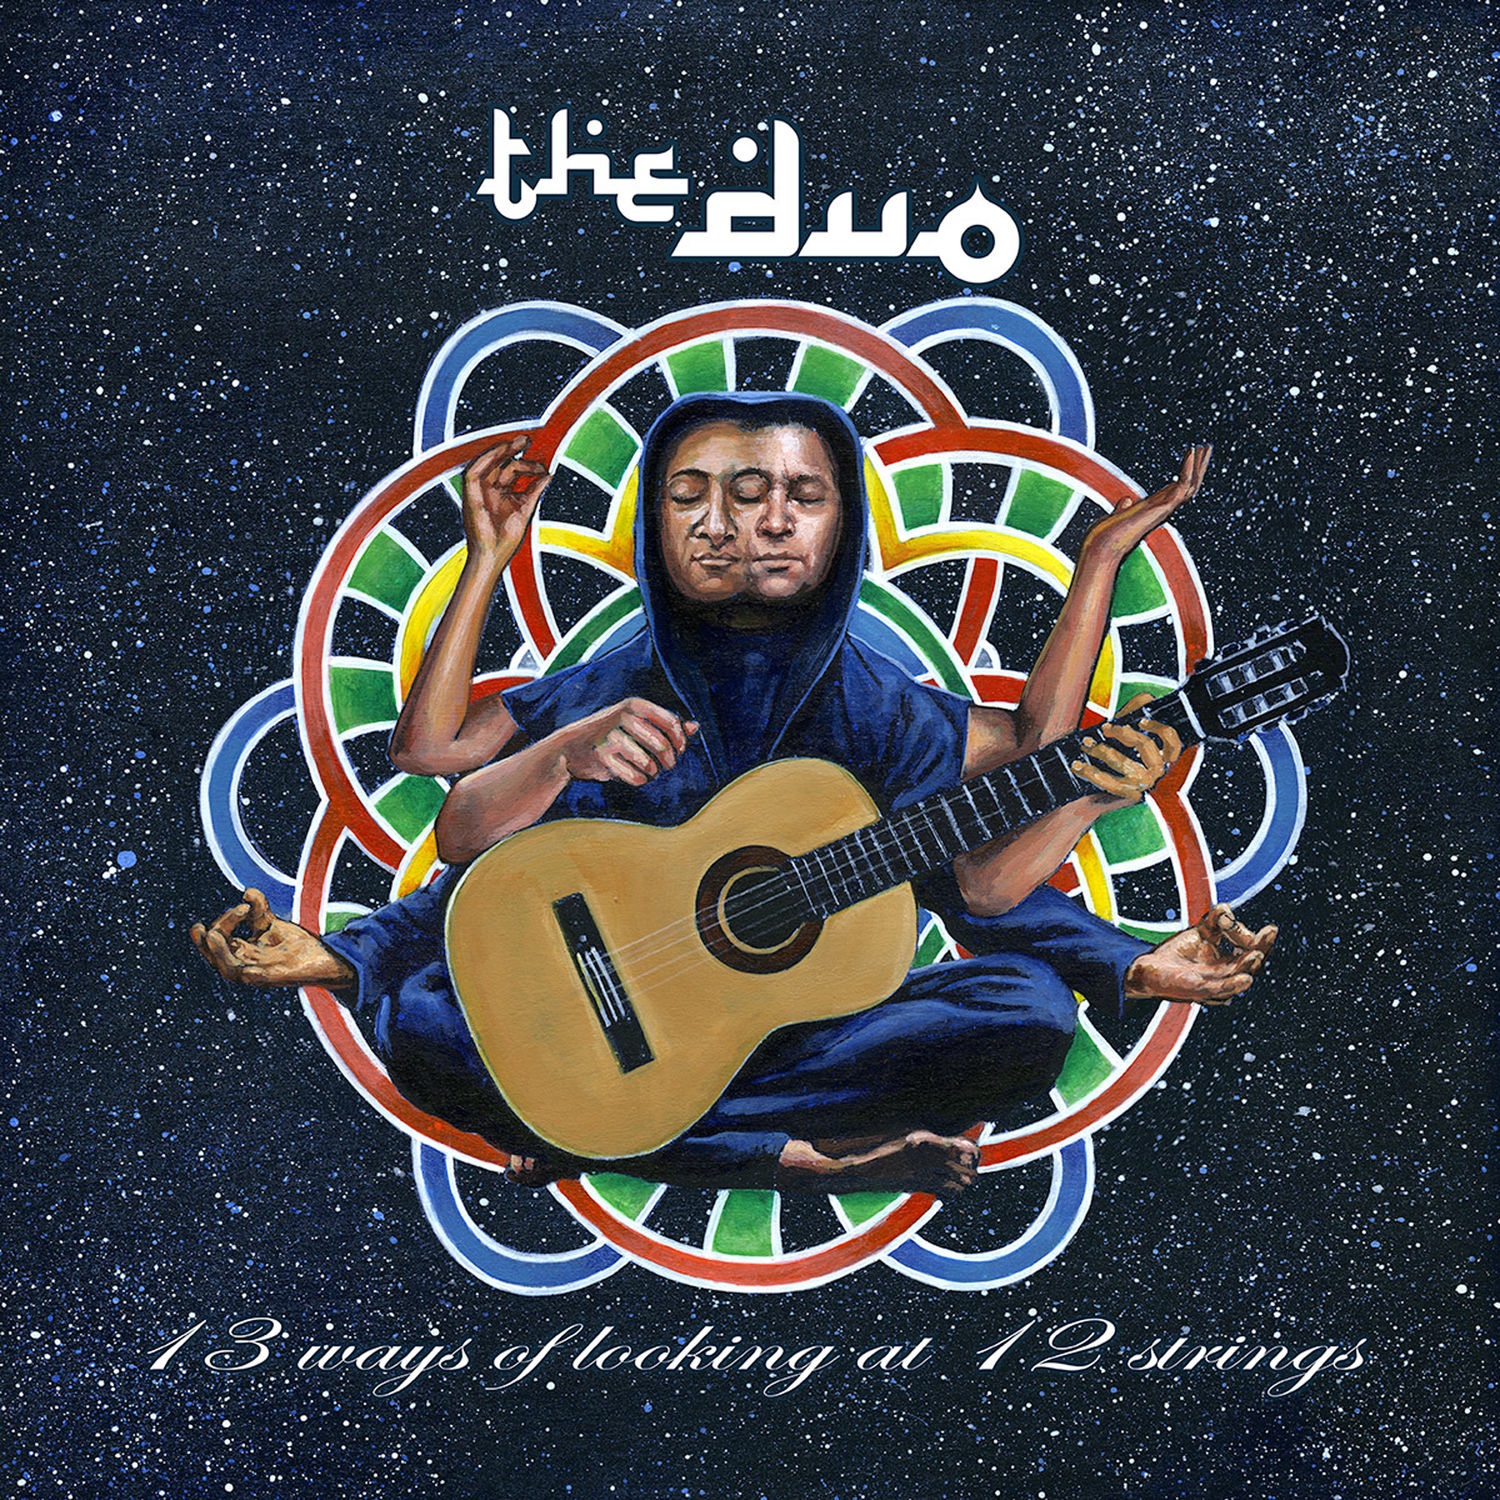 The DUO & Bryan Johanson – 13 Ways of Looking at 12 Strings (2019) [FLAC 24bit/176,4kHz]